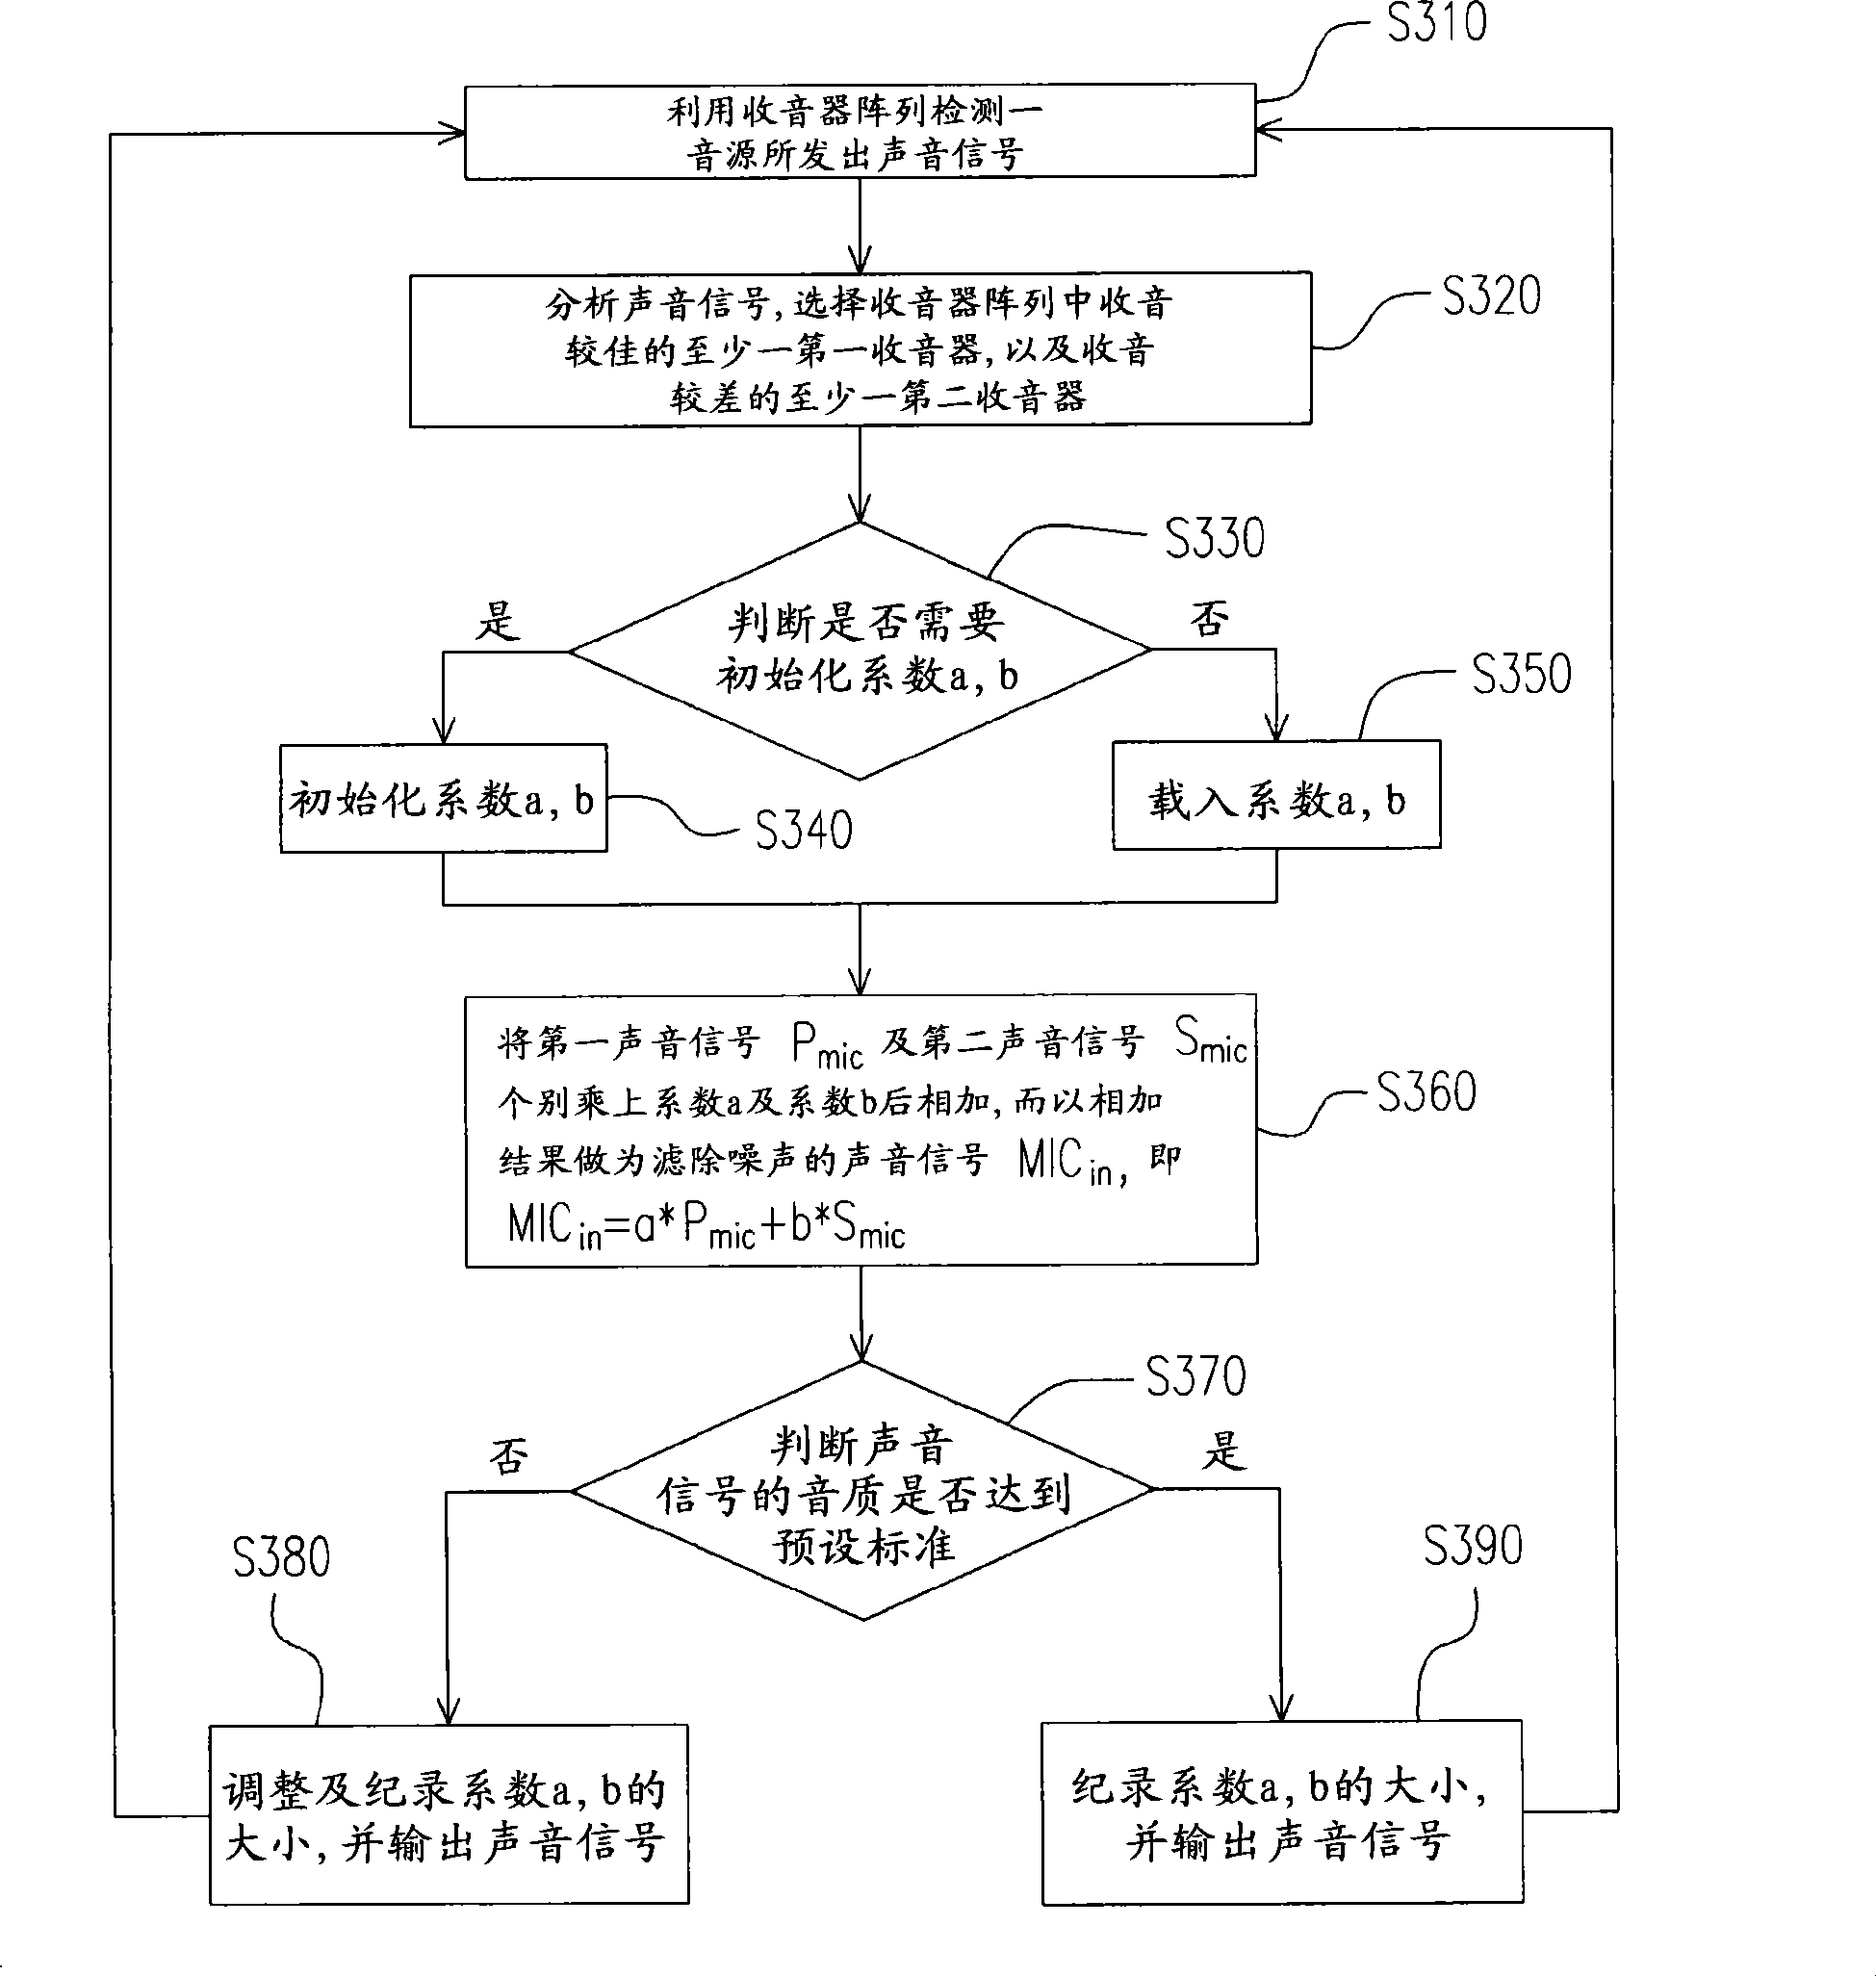 Method for filtering sound noise